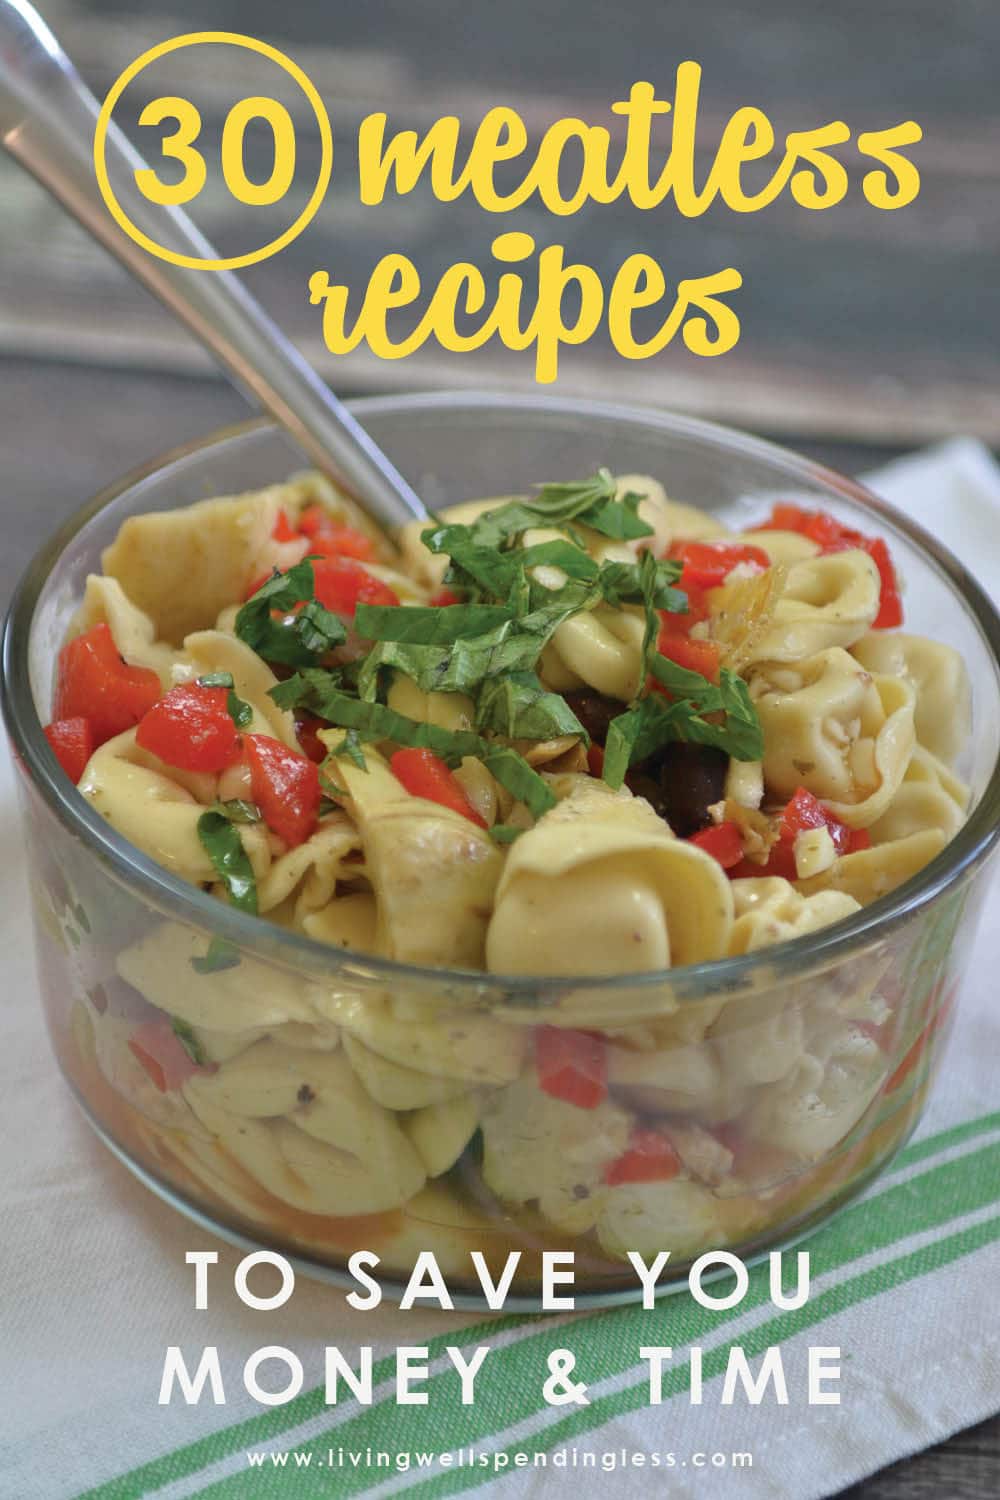 Looking for dinner recipes that require no meat and are insanely delicious? Check out these 30 Meatless Meal Recipes that will save you money, come in handy when some ingredients are hard to acquire, and help to add more hearty vegetables into family meals without creating panic attacks. They're so good! #foodstorage #foodmadesimple #meatlessmeals #meatlessrecipes #vegetarian #vegetarianrecipes #meatlessmondays